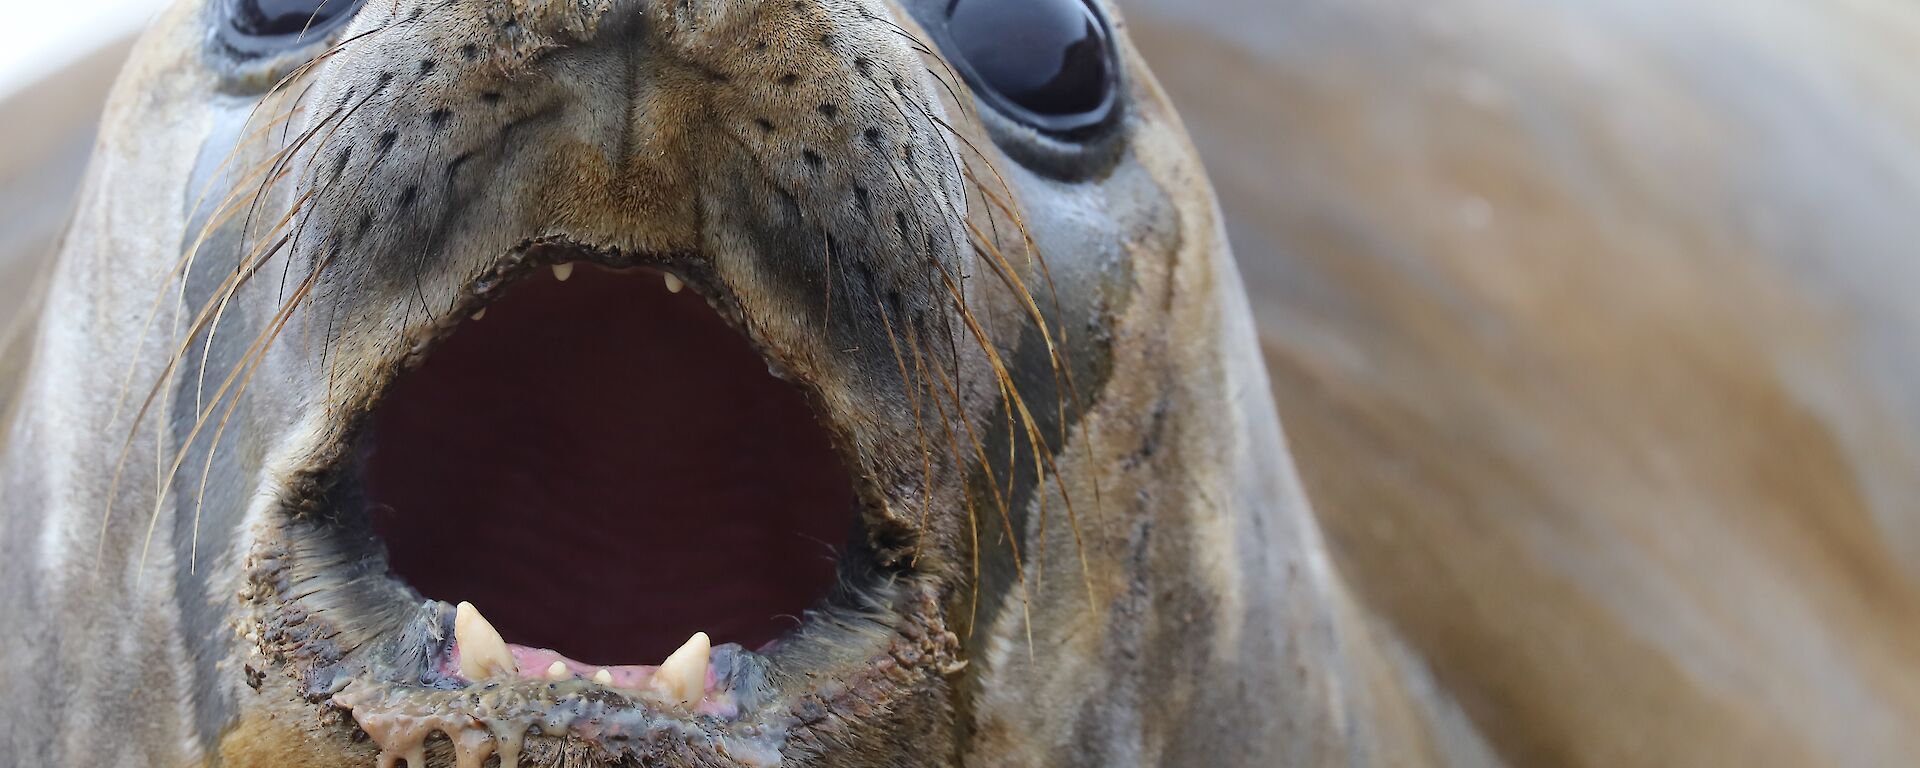 Young elephant seal, close up of face with big glassy brown eyes and partially open mouth showing incisors and gunk drooling out of mouth